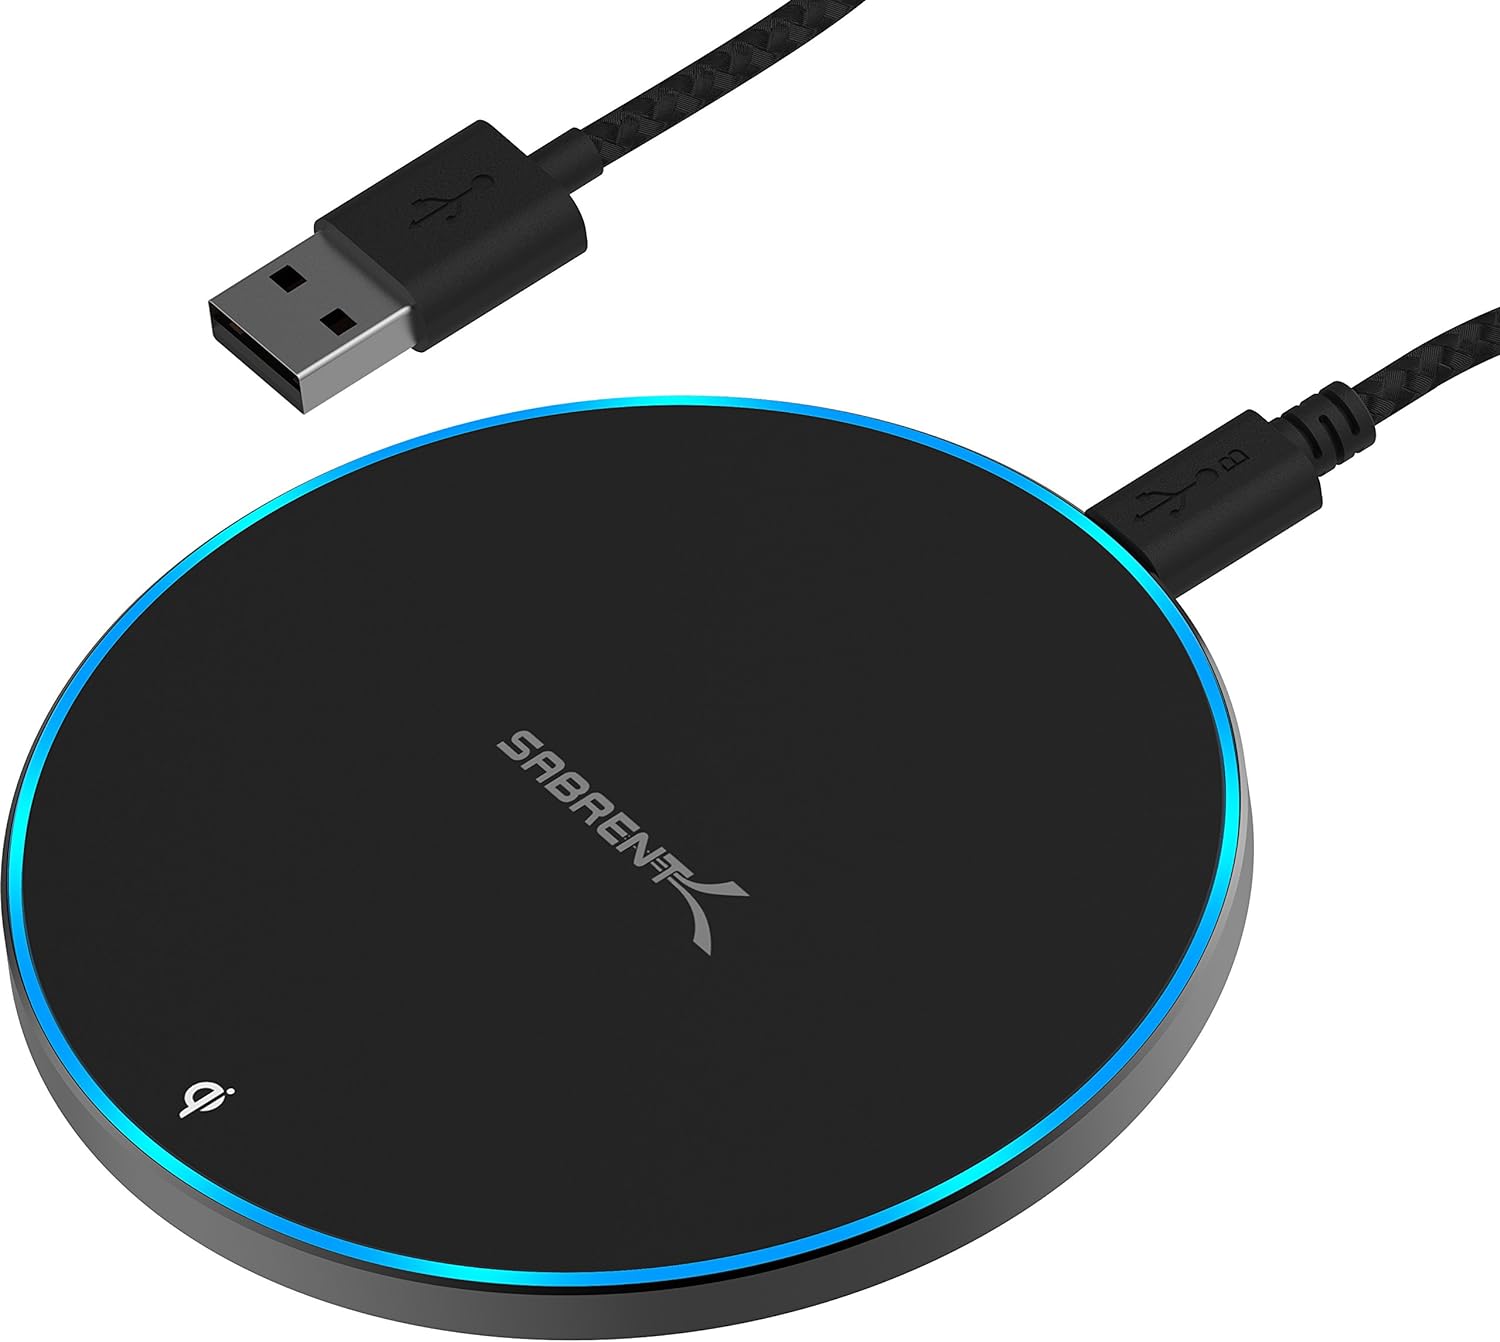 SABRENT 10W qi Wireless Fast Charger Charging Pad, Universally Compatible with All qi Enabled Phones [AC Adapter Not Included] Black (WL-QIFC)